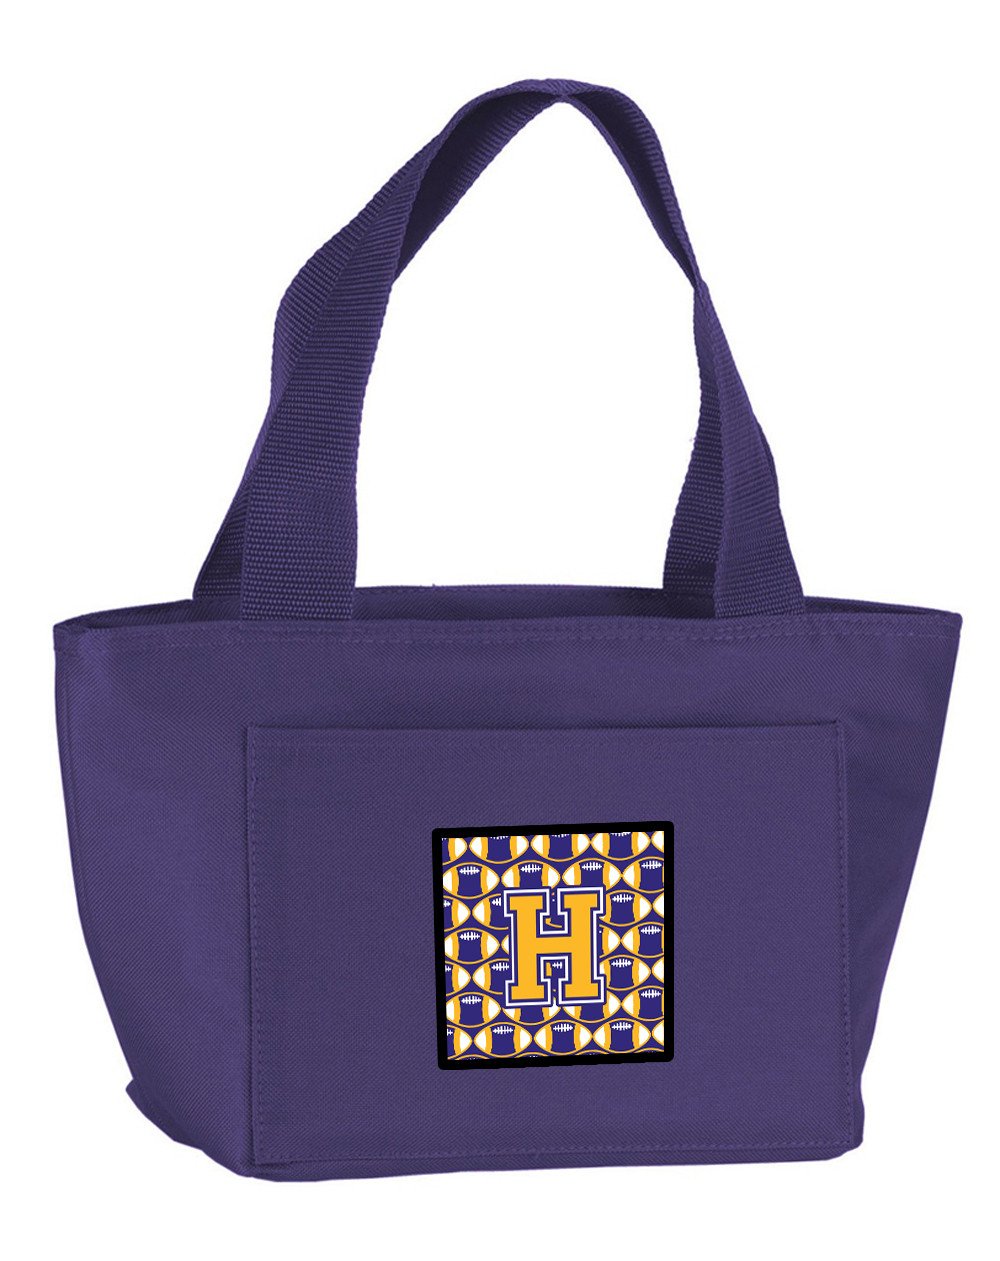 Letter H Football Purple and Gold Lunch Bag CJ1064-HPR-8808 by Caroline's Treasures